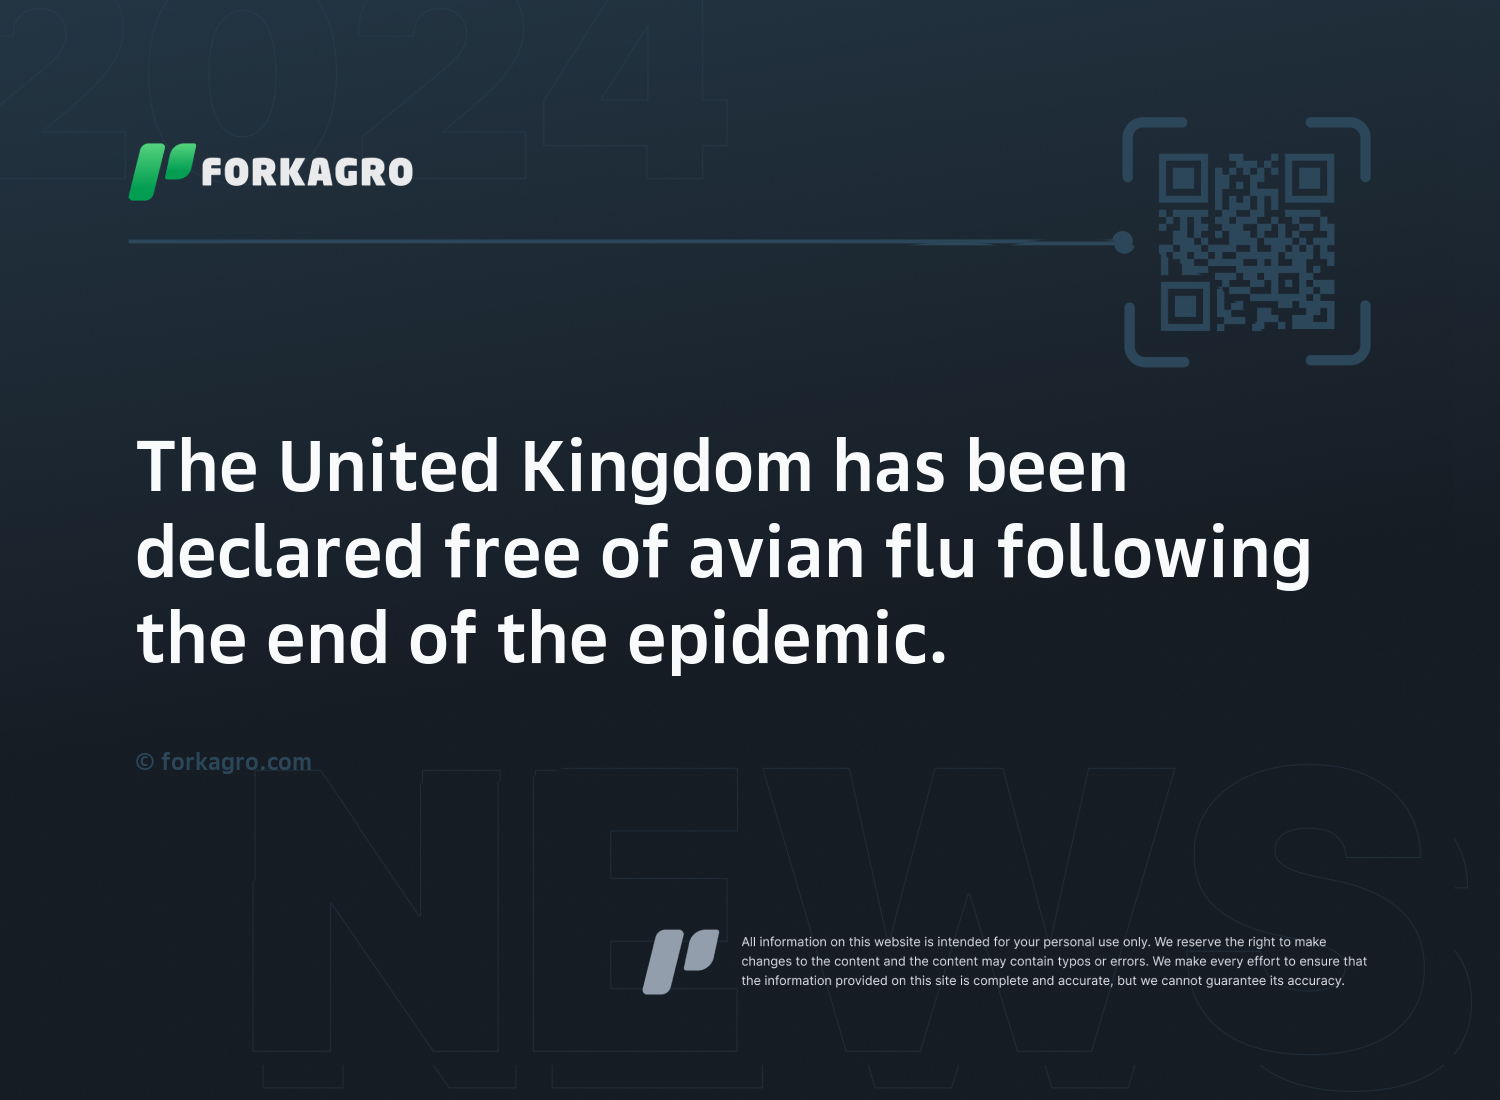 The United Kingdom has been declared free of avian flu following the end of the epidemic.